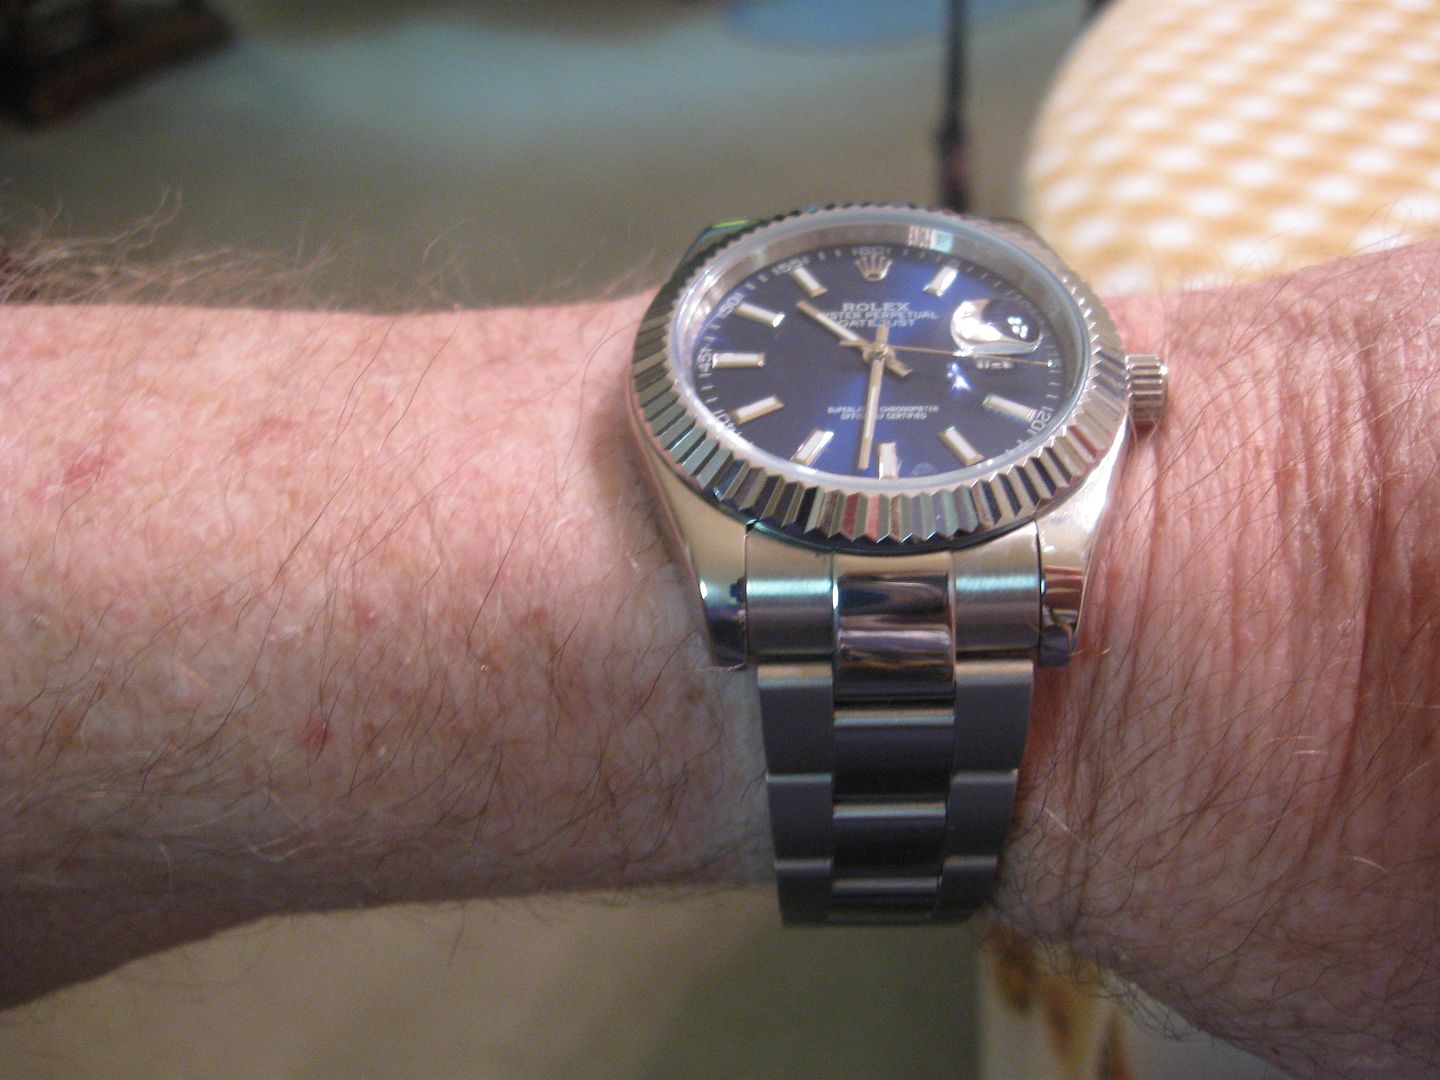 ROLEXDJ11.Blue.Dial%20on%20SS%20Oyster%2